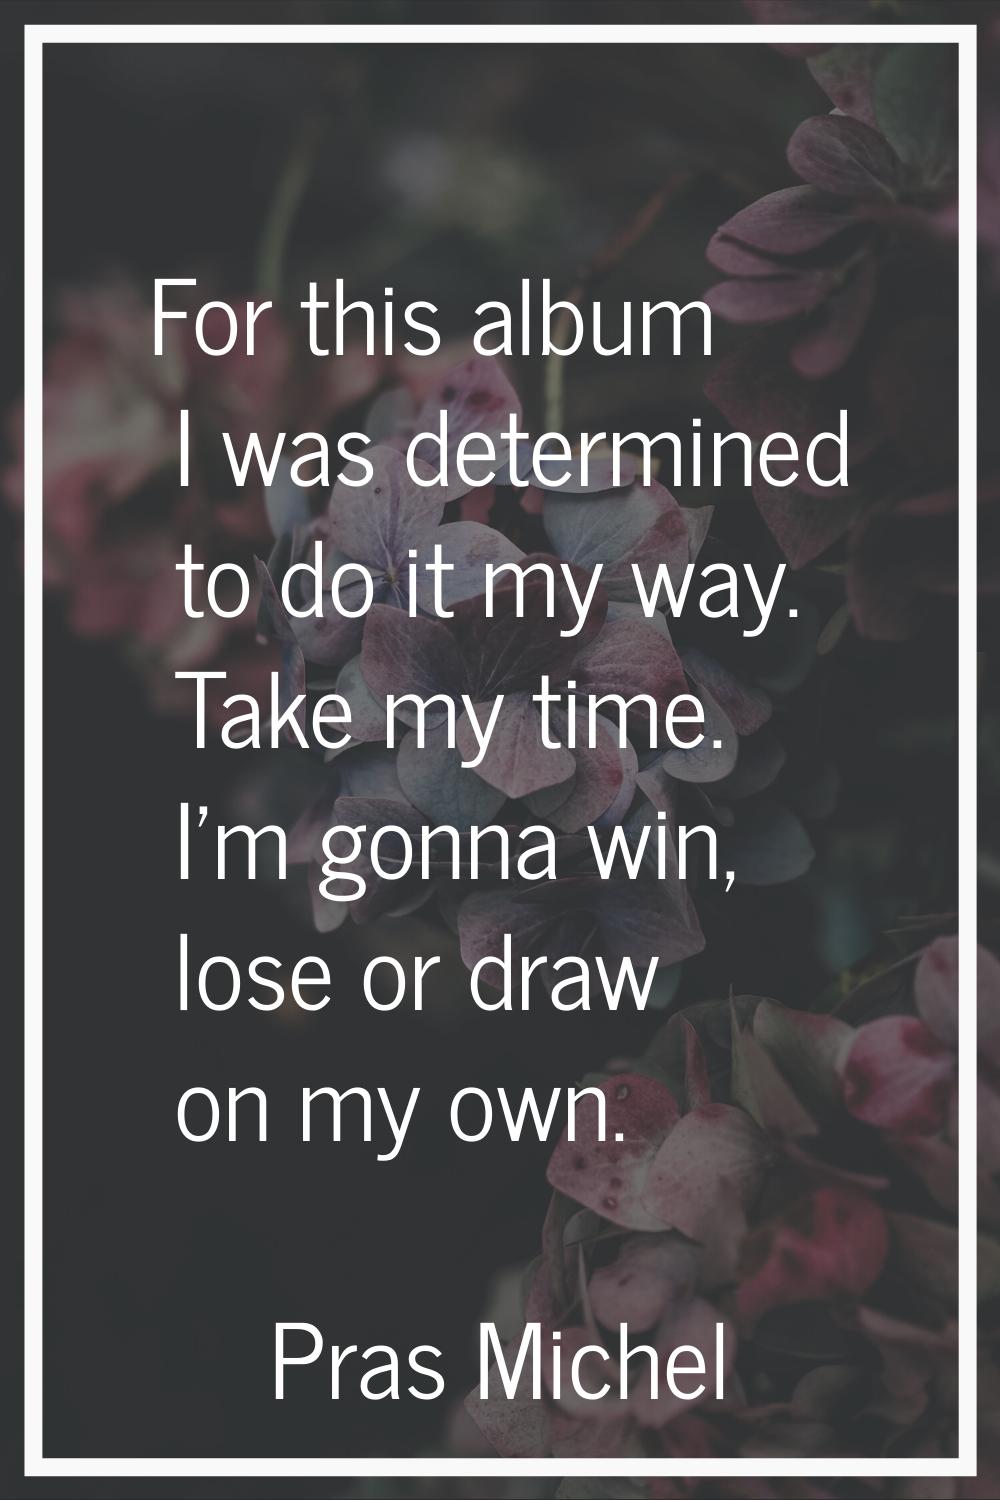 For this album I was determined to do it my way. Take my time. I'm gonna win, lose or draw on my ow